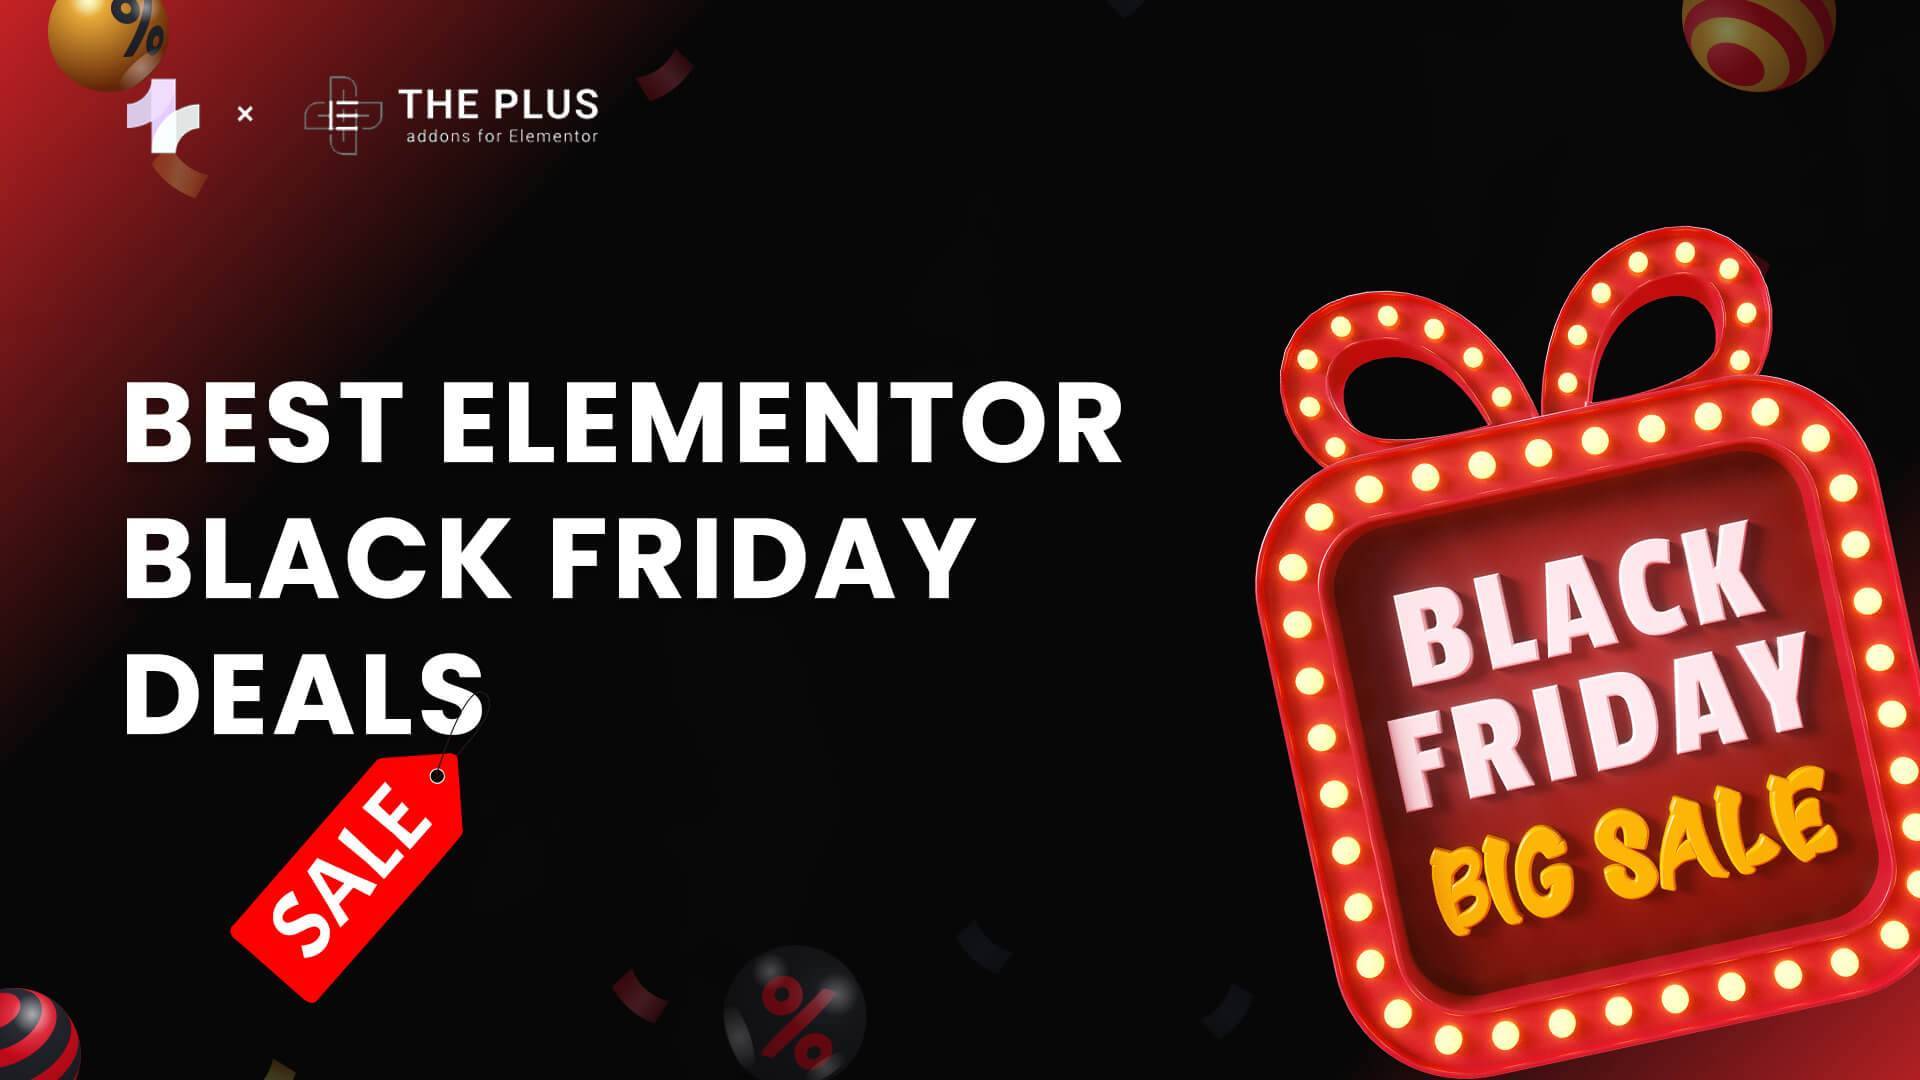 Elementor Black Friday Deals from The Plus Addons for Elementor